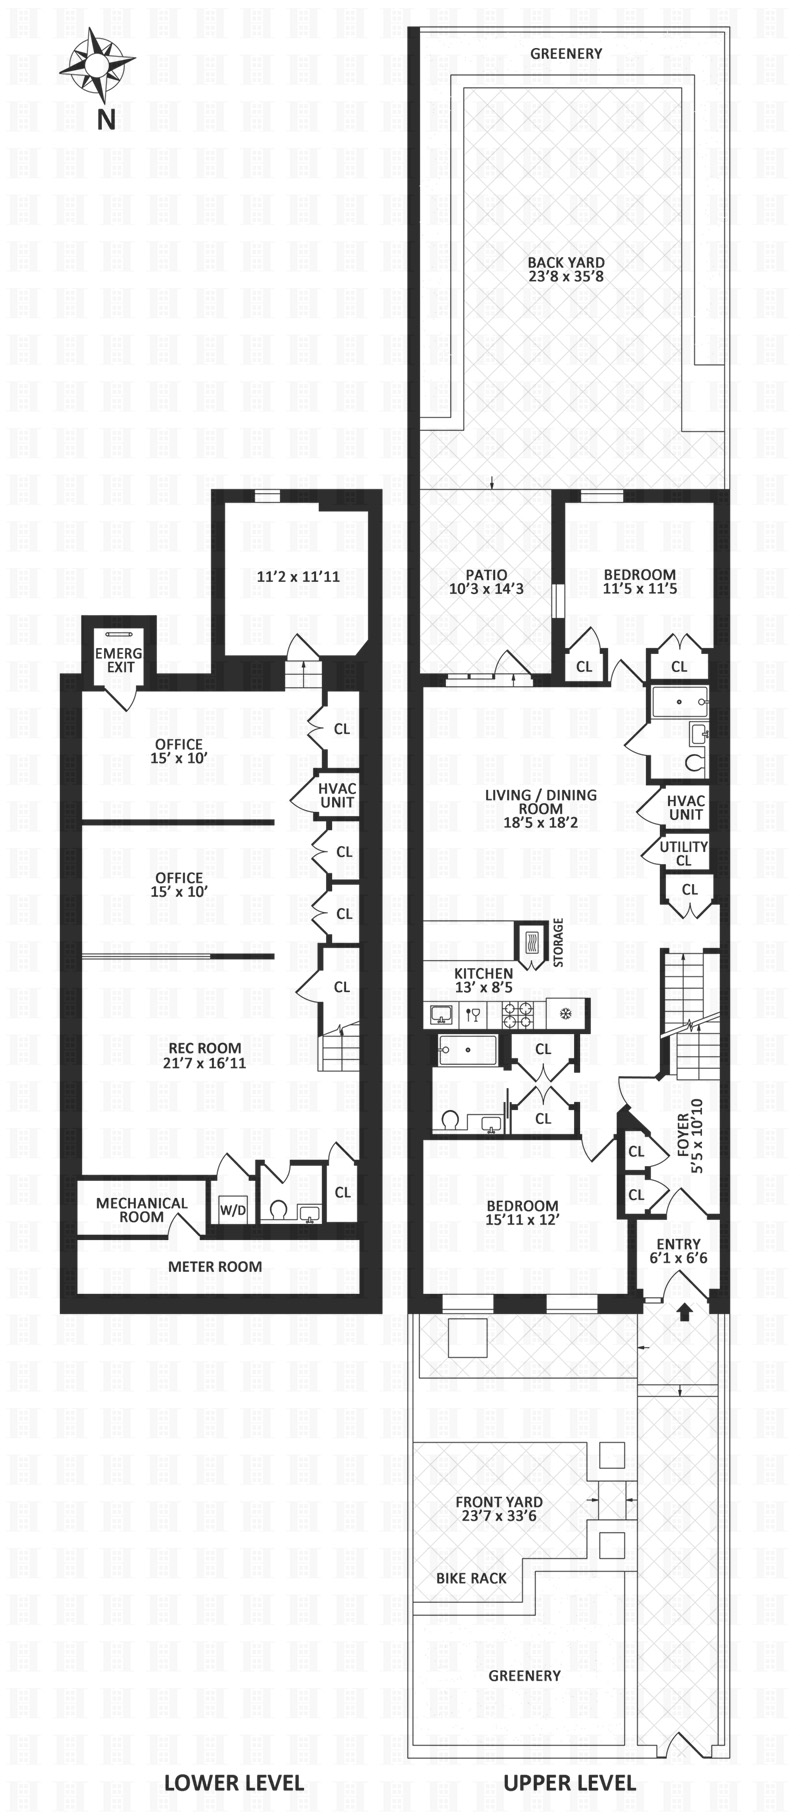 Floorplan for 132 2nd Place, 1